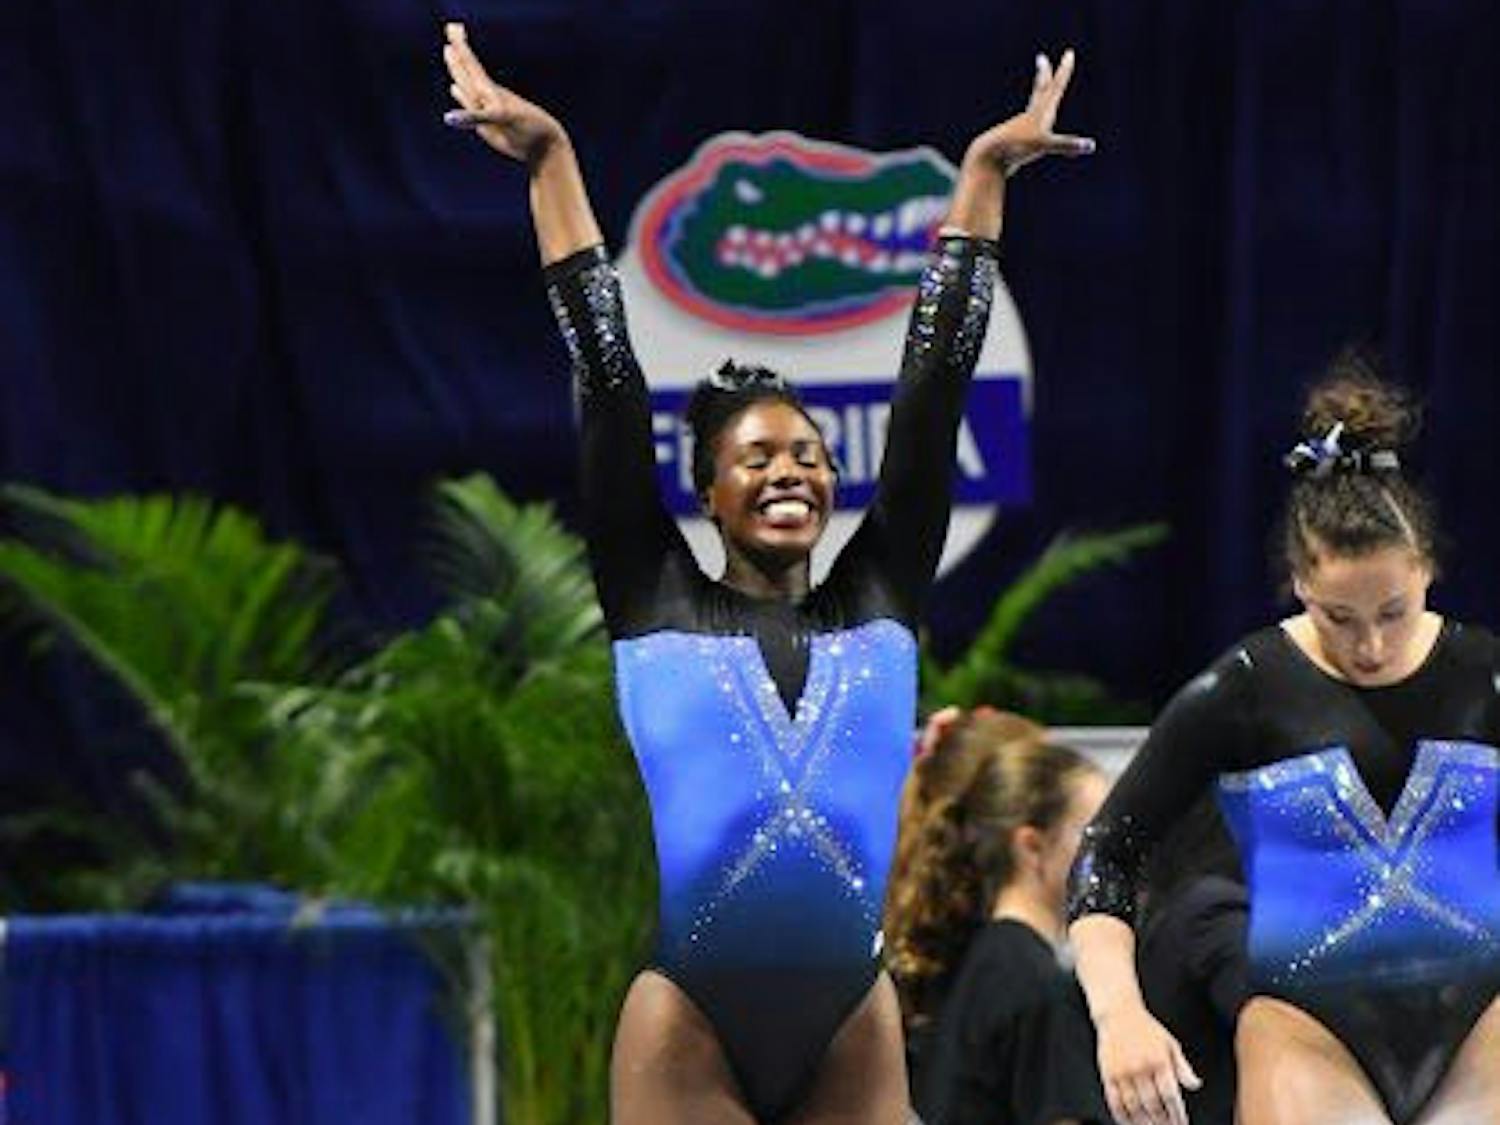 UF gymnast Sierra Alexander finishes performing a routine during Florida's win against Missouri on Feb. 24, 2017, in the O'Connell Center.